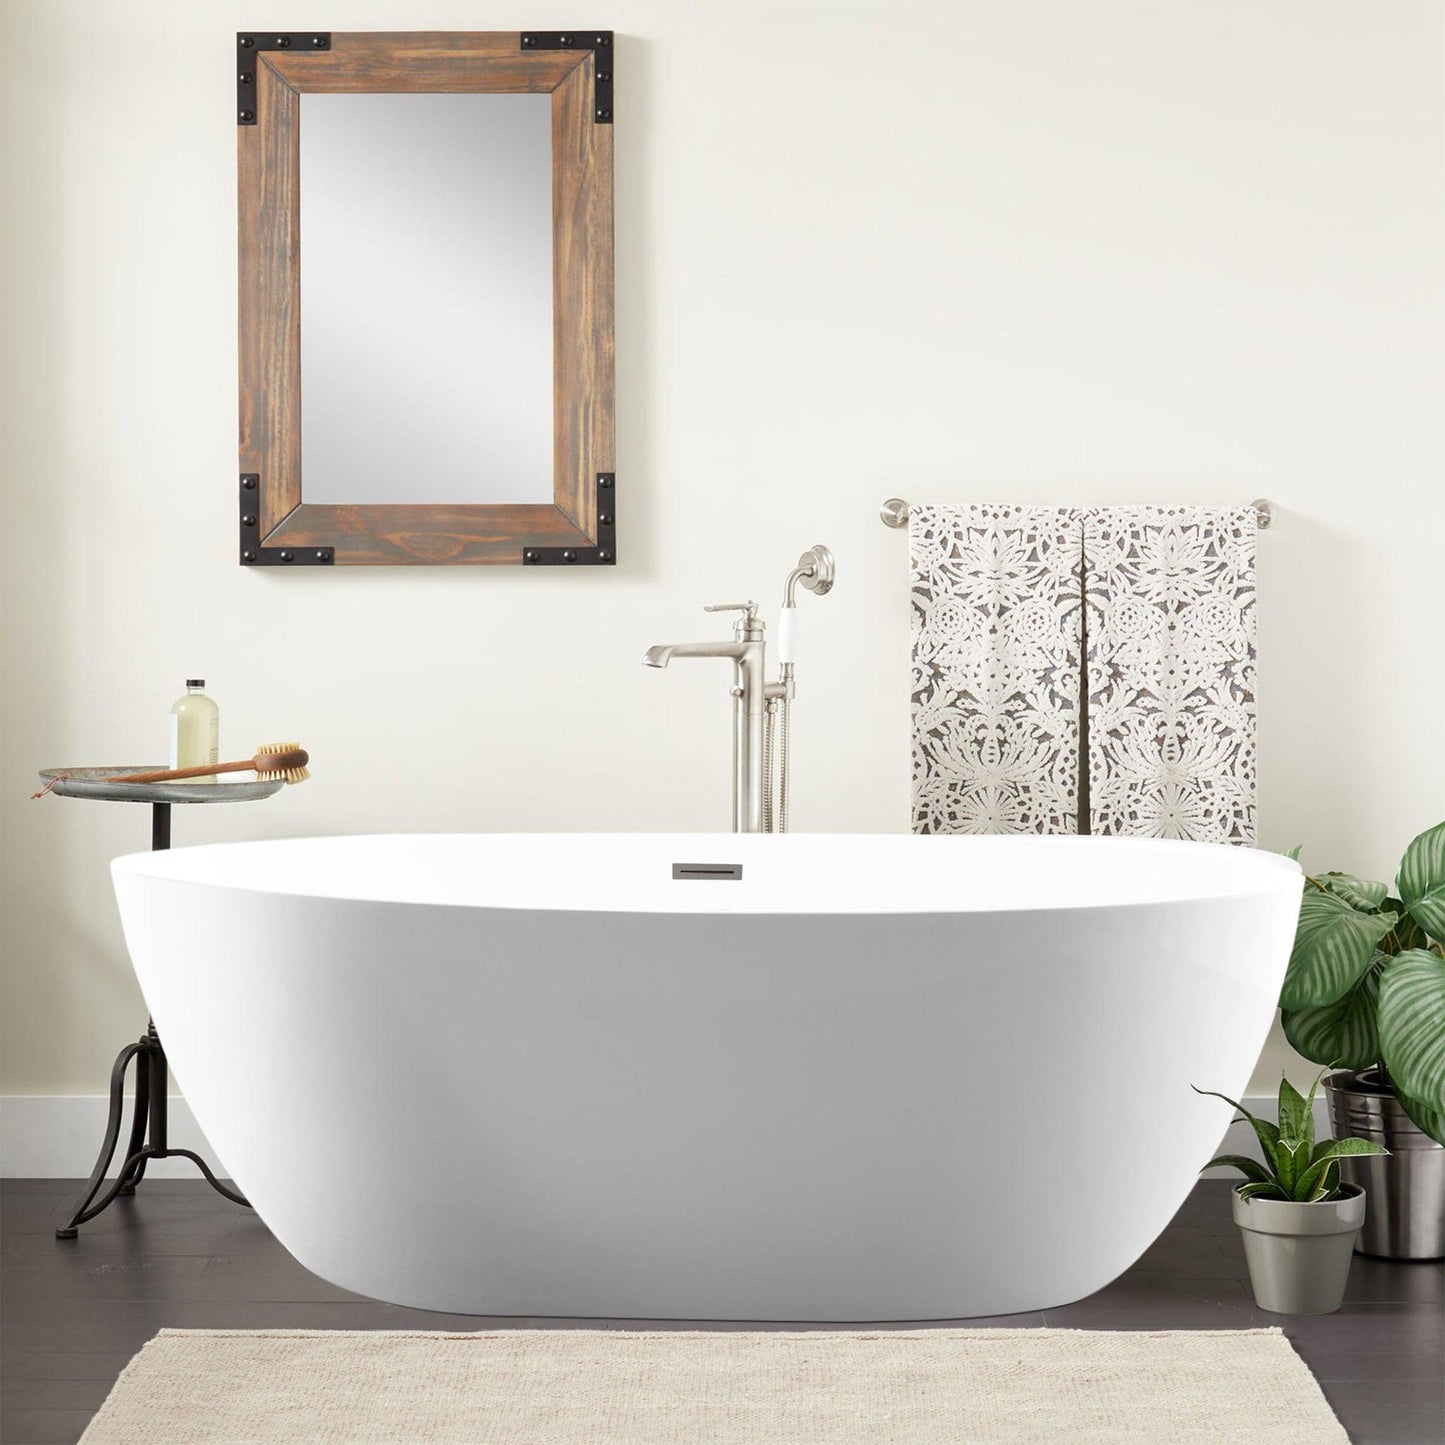 Vanity Art 59" x 22" White Acrylic Freestanding Contemporary Design Soaking Bathtub With Brushed Nickel Slotted Overflow & Pop-up Drain